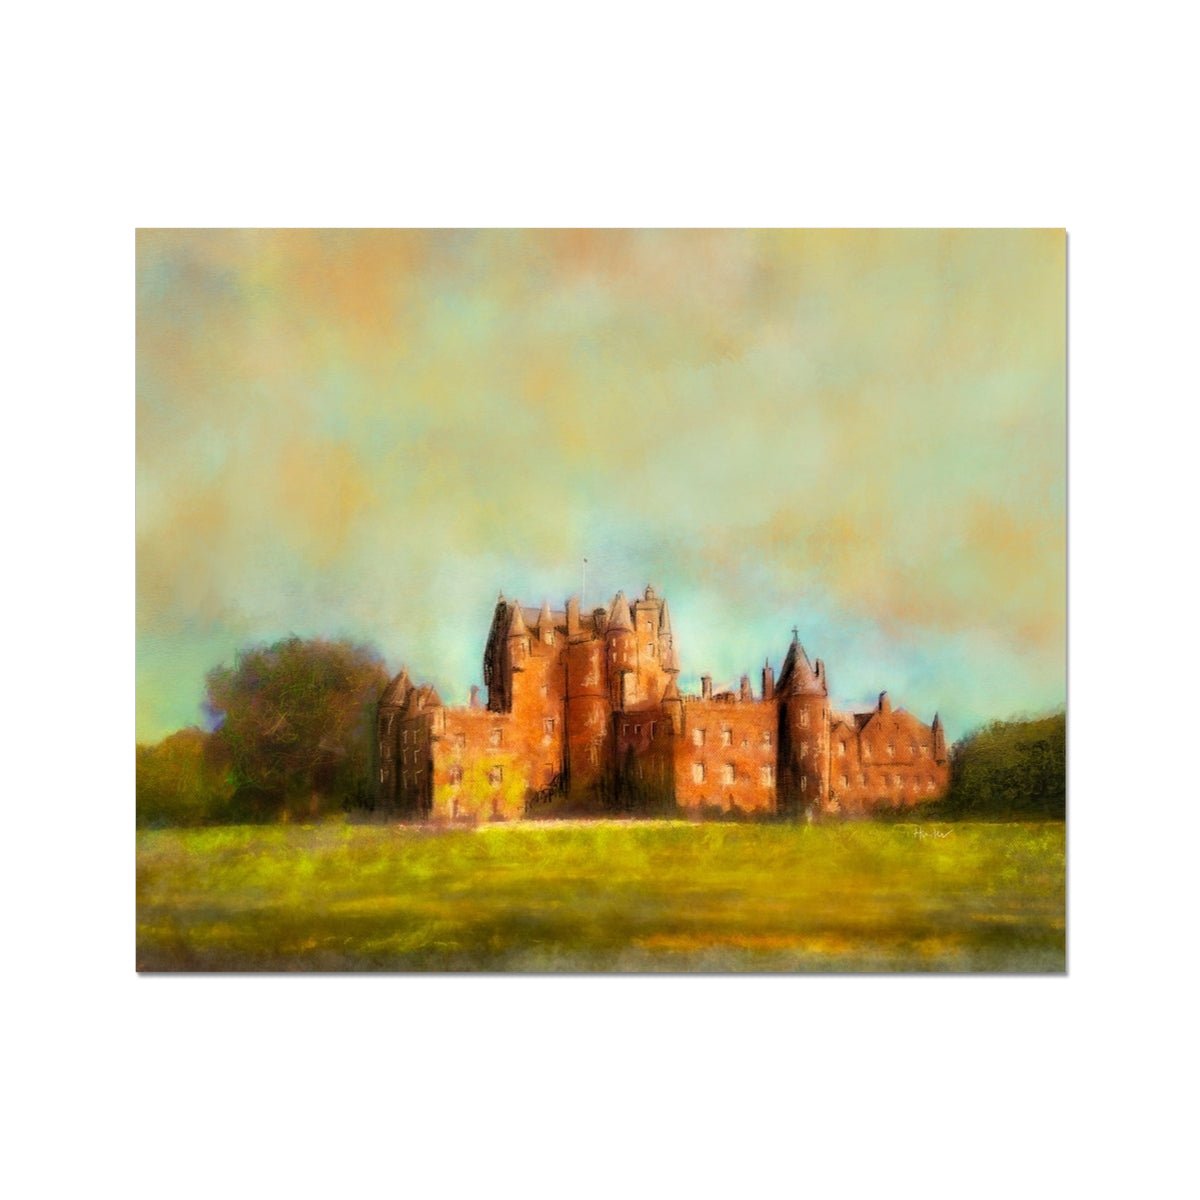 Glamis Castle Painting | Artist Proof Collector Prints From Scotland-Artist Proof Collector Prints-Historic & Iconic Scotland Art Gallery-20"x16"-Paintings, Prints, Homeware, Art Gifts From Scotland By Scottish Artist Kevin Hunter